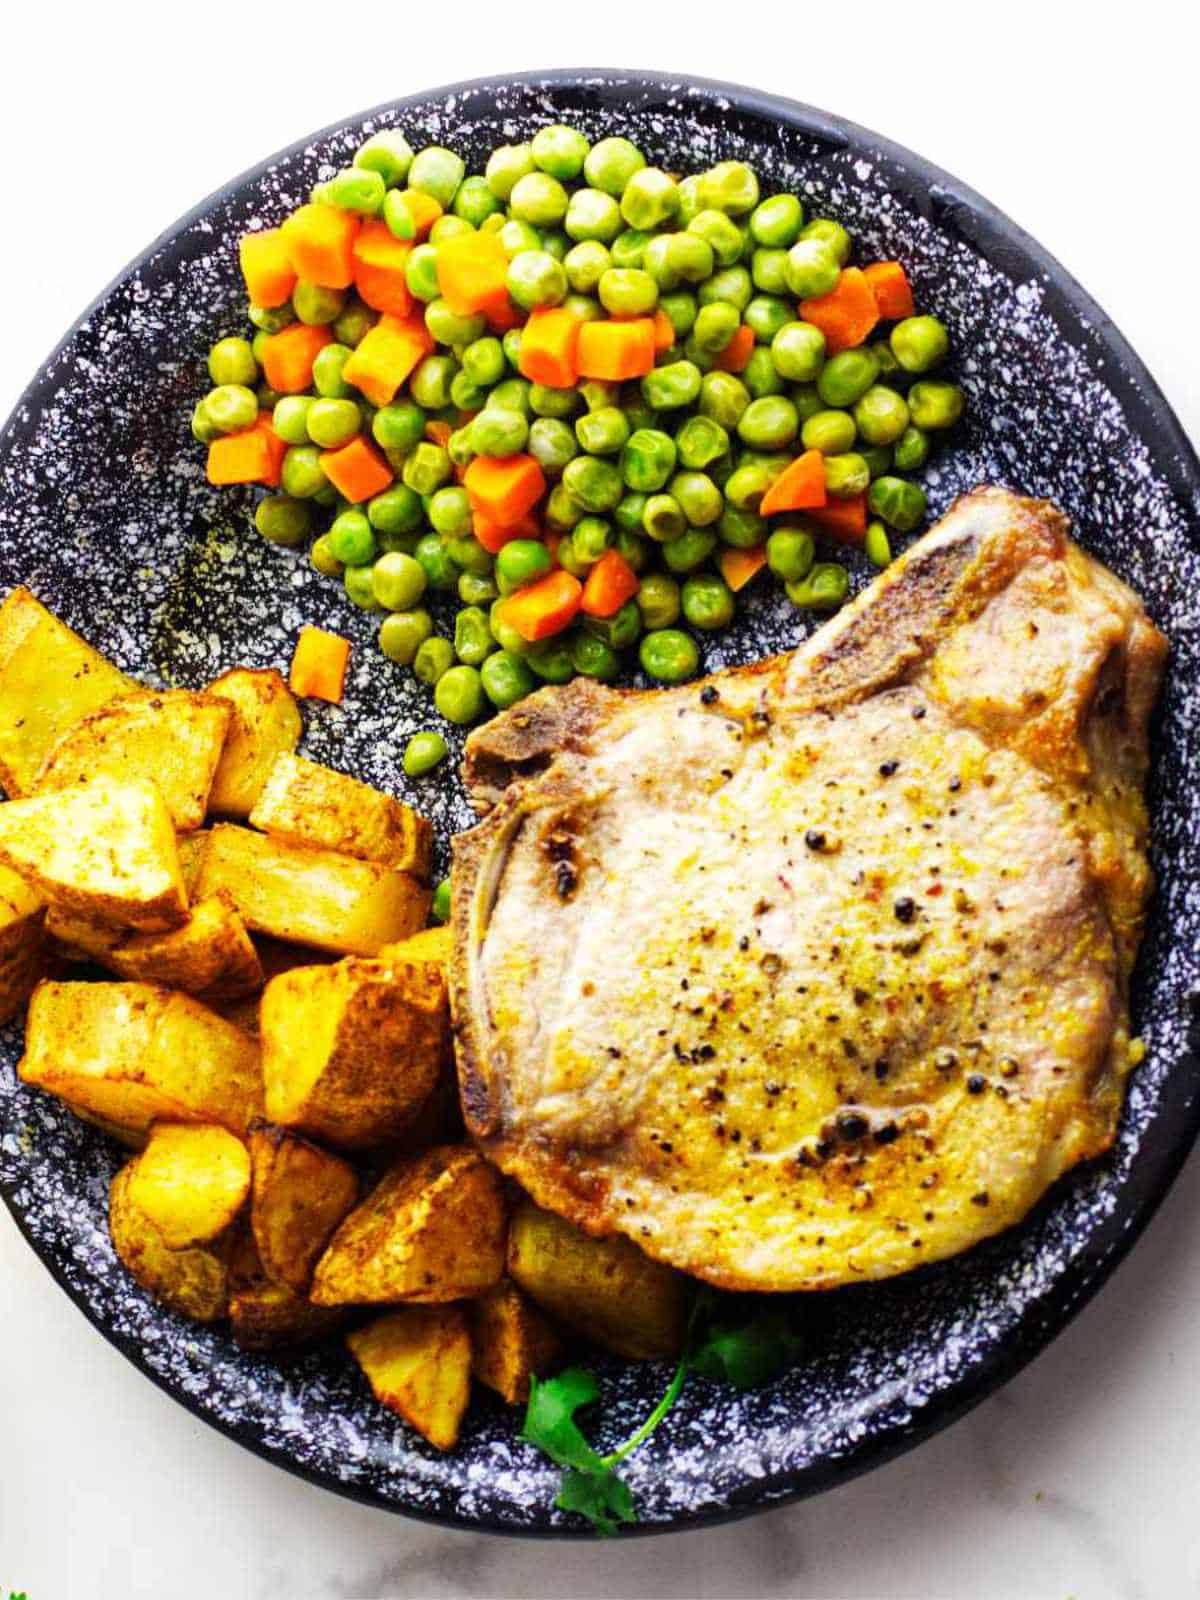 seasoned pork chops (no breading), on a plate with peas and carrots and diced potatoes.